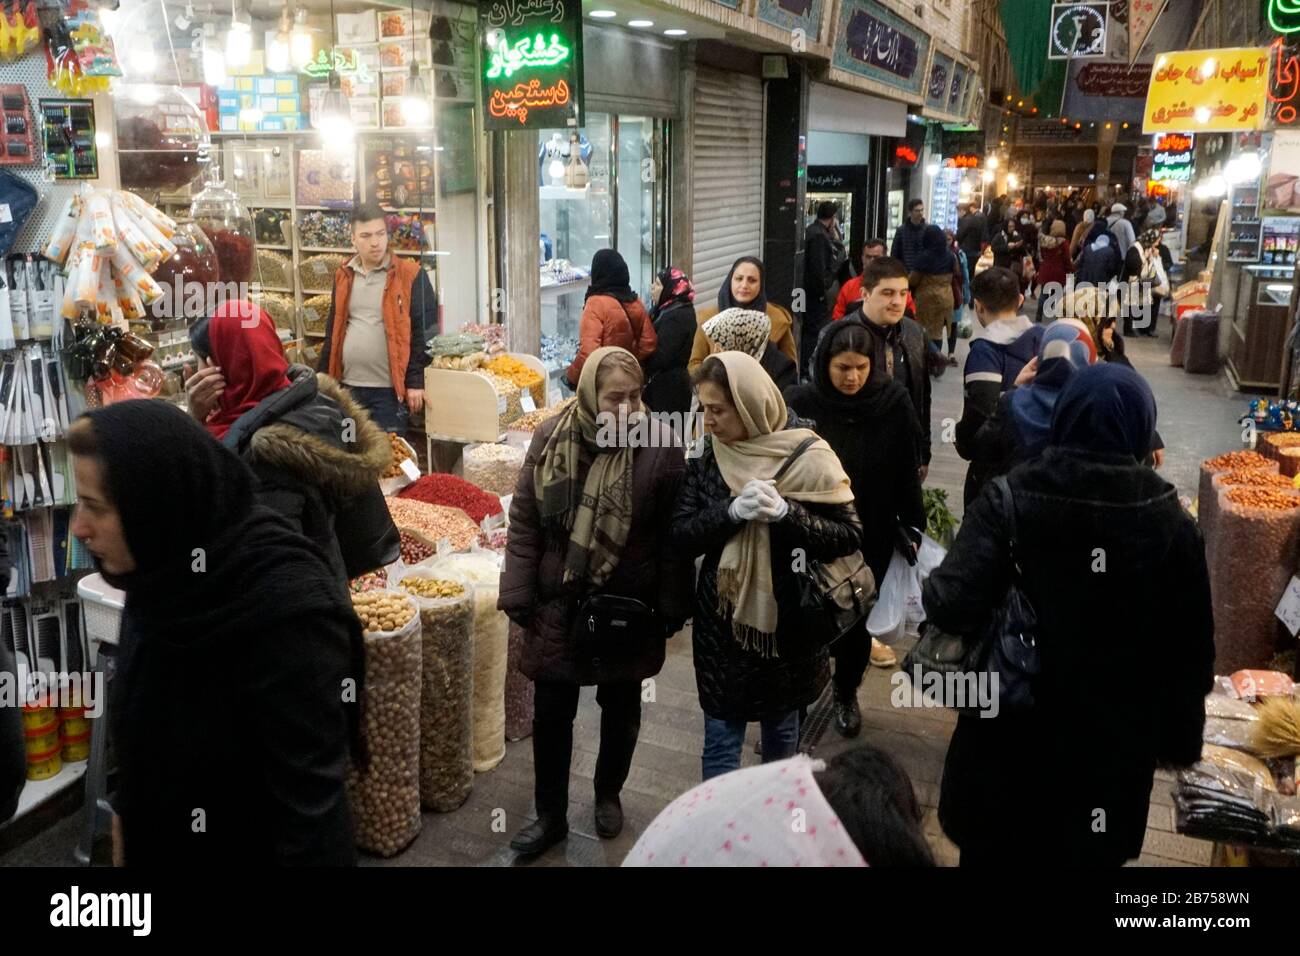 View of a bazaar in Tehran, Iran, on 09.03.2019. After the USA withdrew from the international nuclear agreement, the country is again imposing sanctions against Iran. [automated translation] Stock Photo